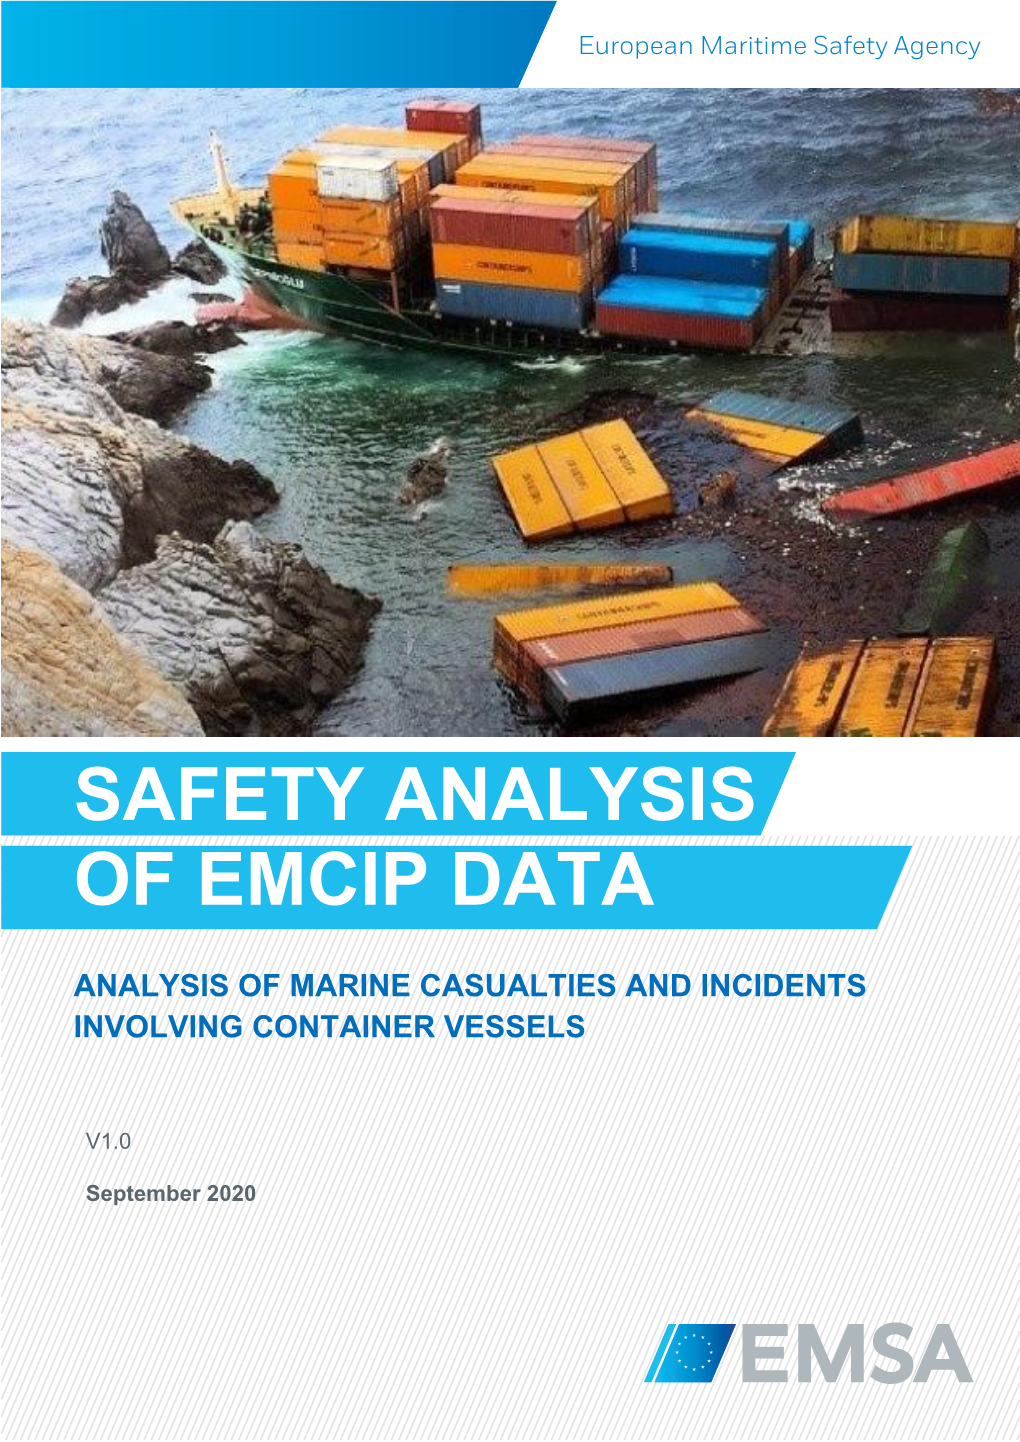 Safety Analysis of EMCIP Data – Container Vessels